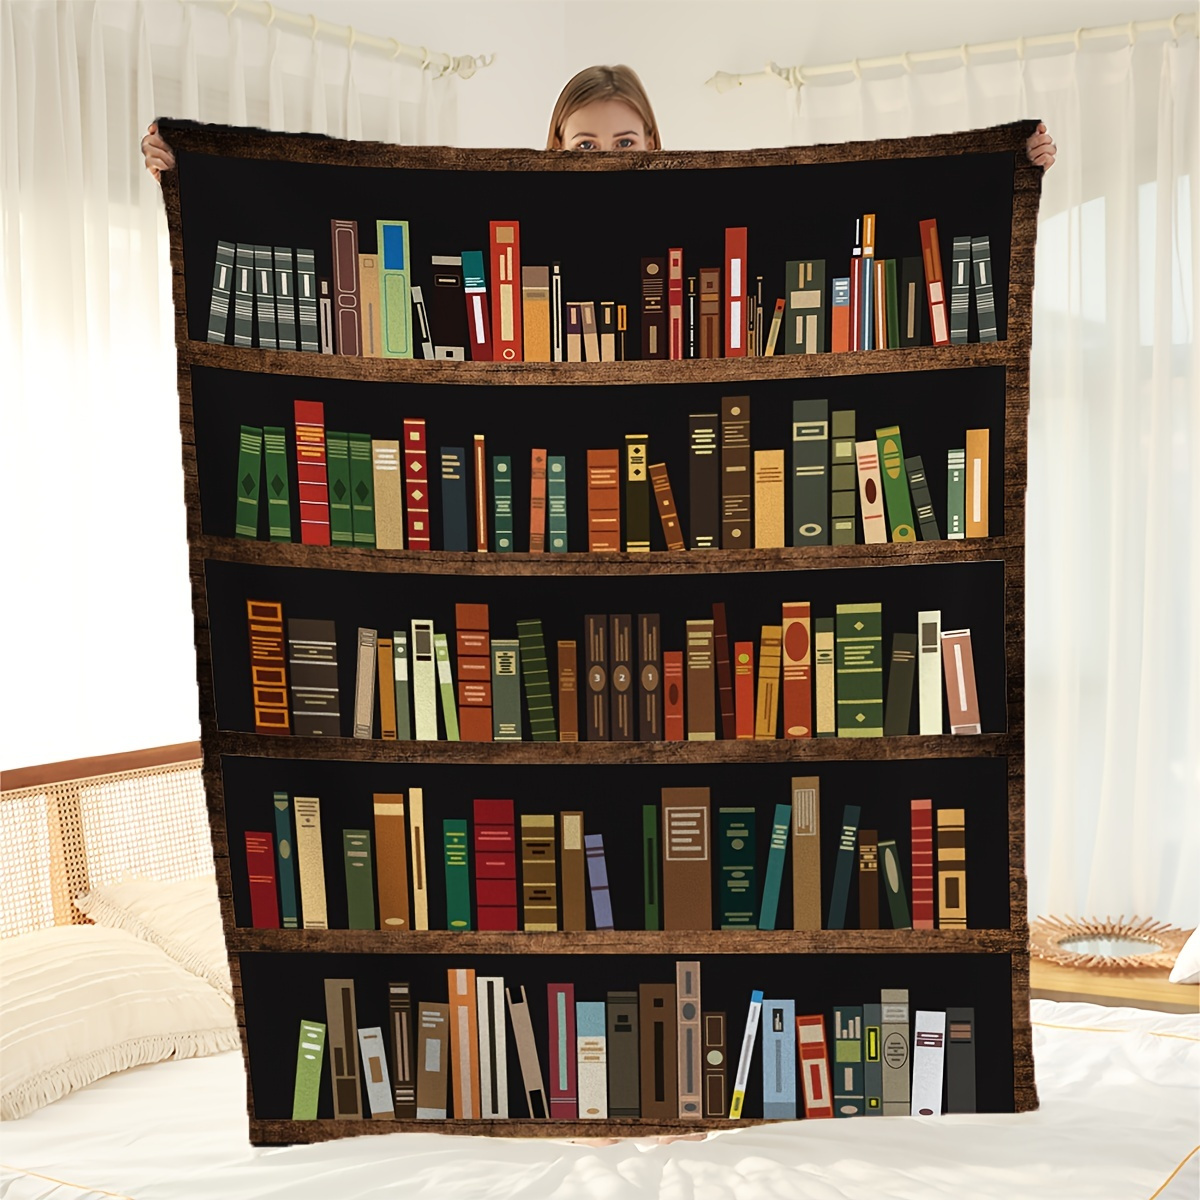 

1pc Bookshelf Print Blanket, Warm Cozy Soft Throw Blanket For Couch Bed Sofa Birthday Gift